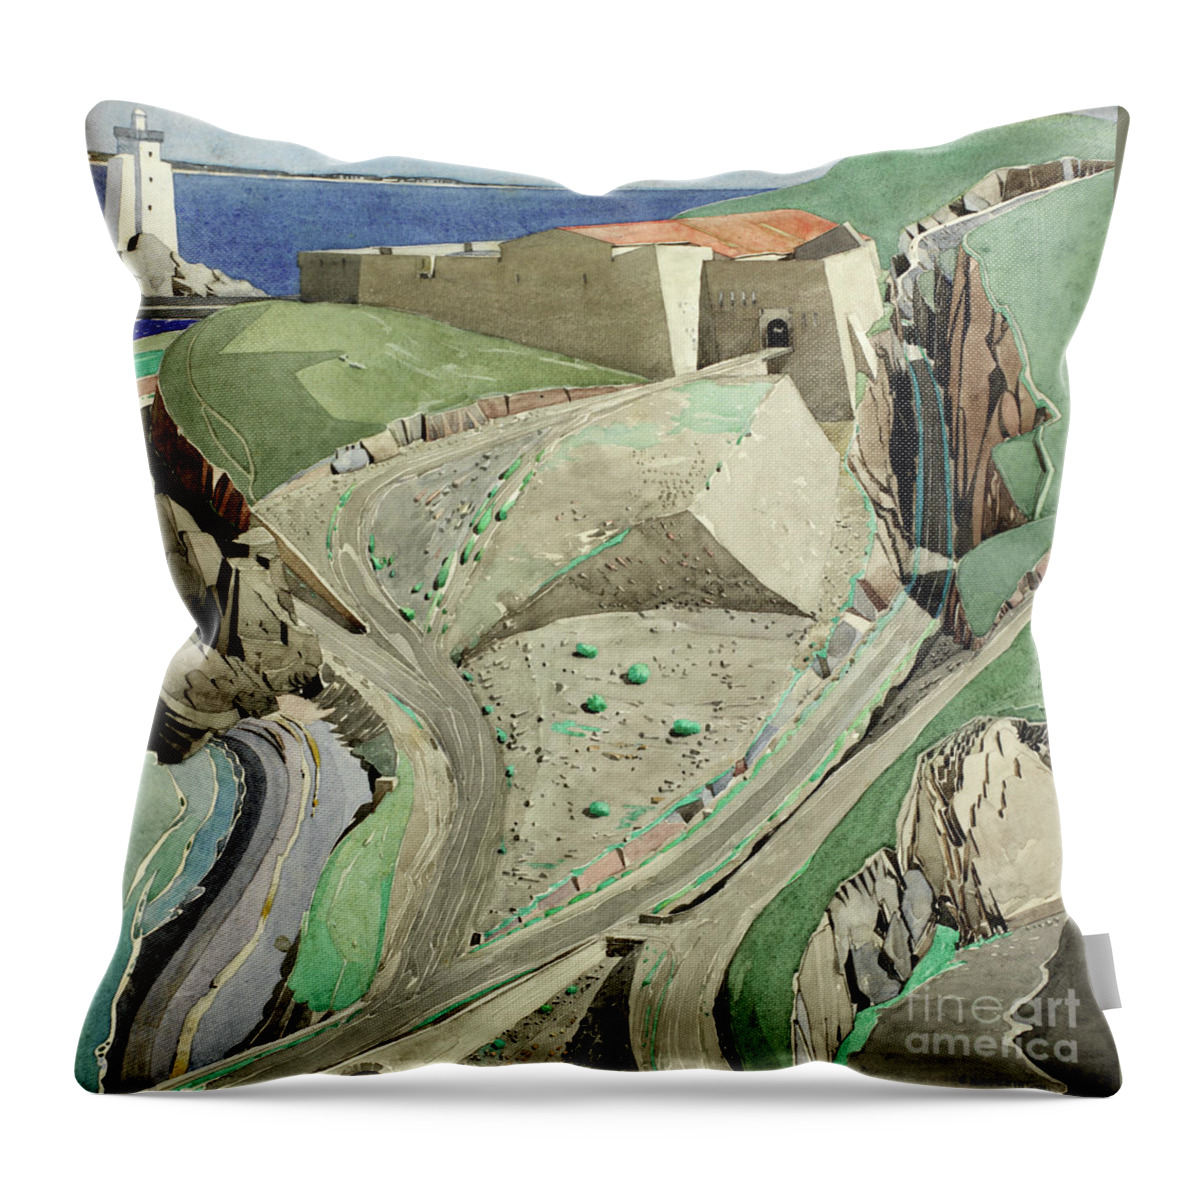 The Fort Throw Pillow featuring the painting The Fort by Charles Rennie Mackintosh